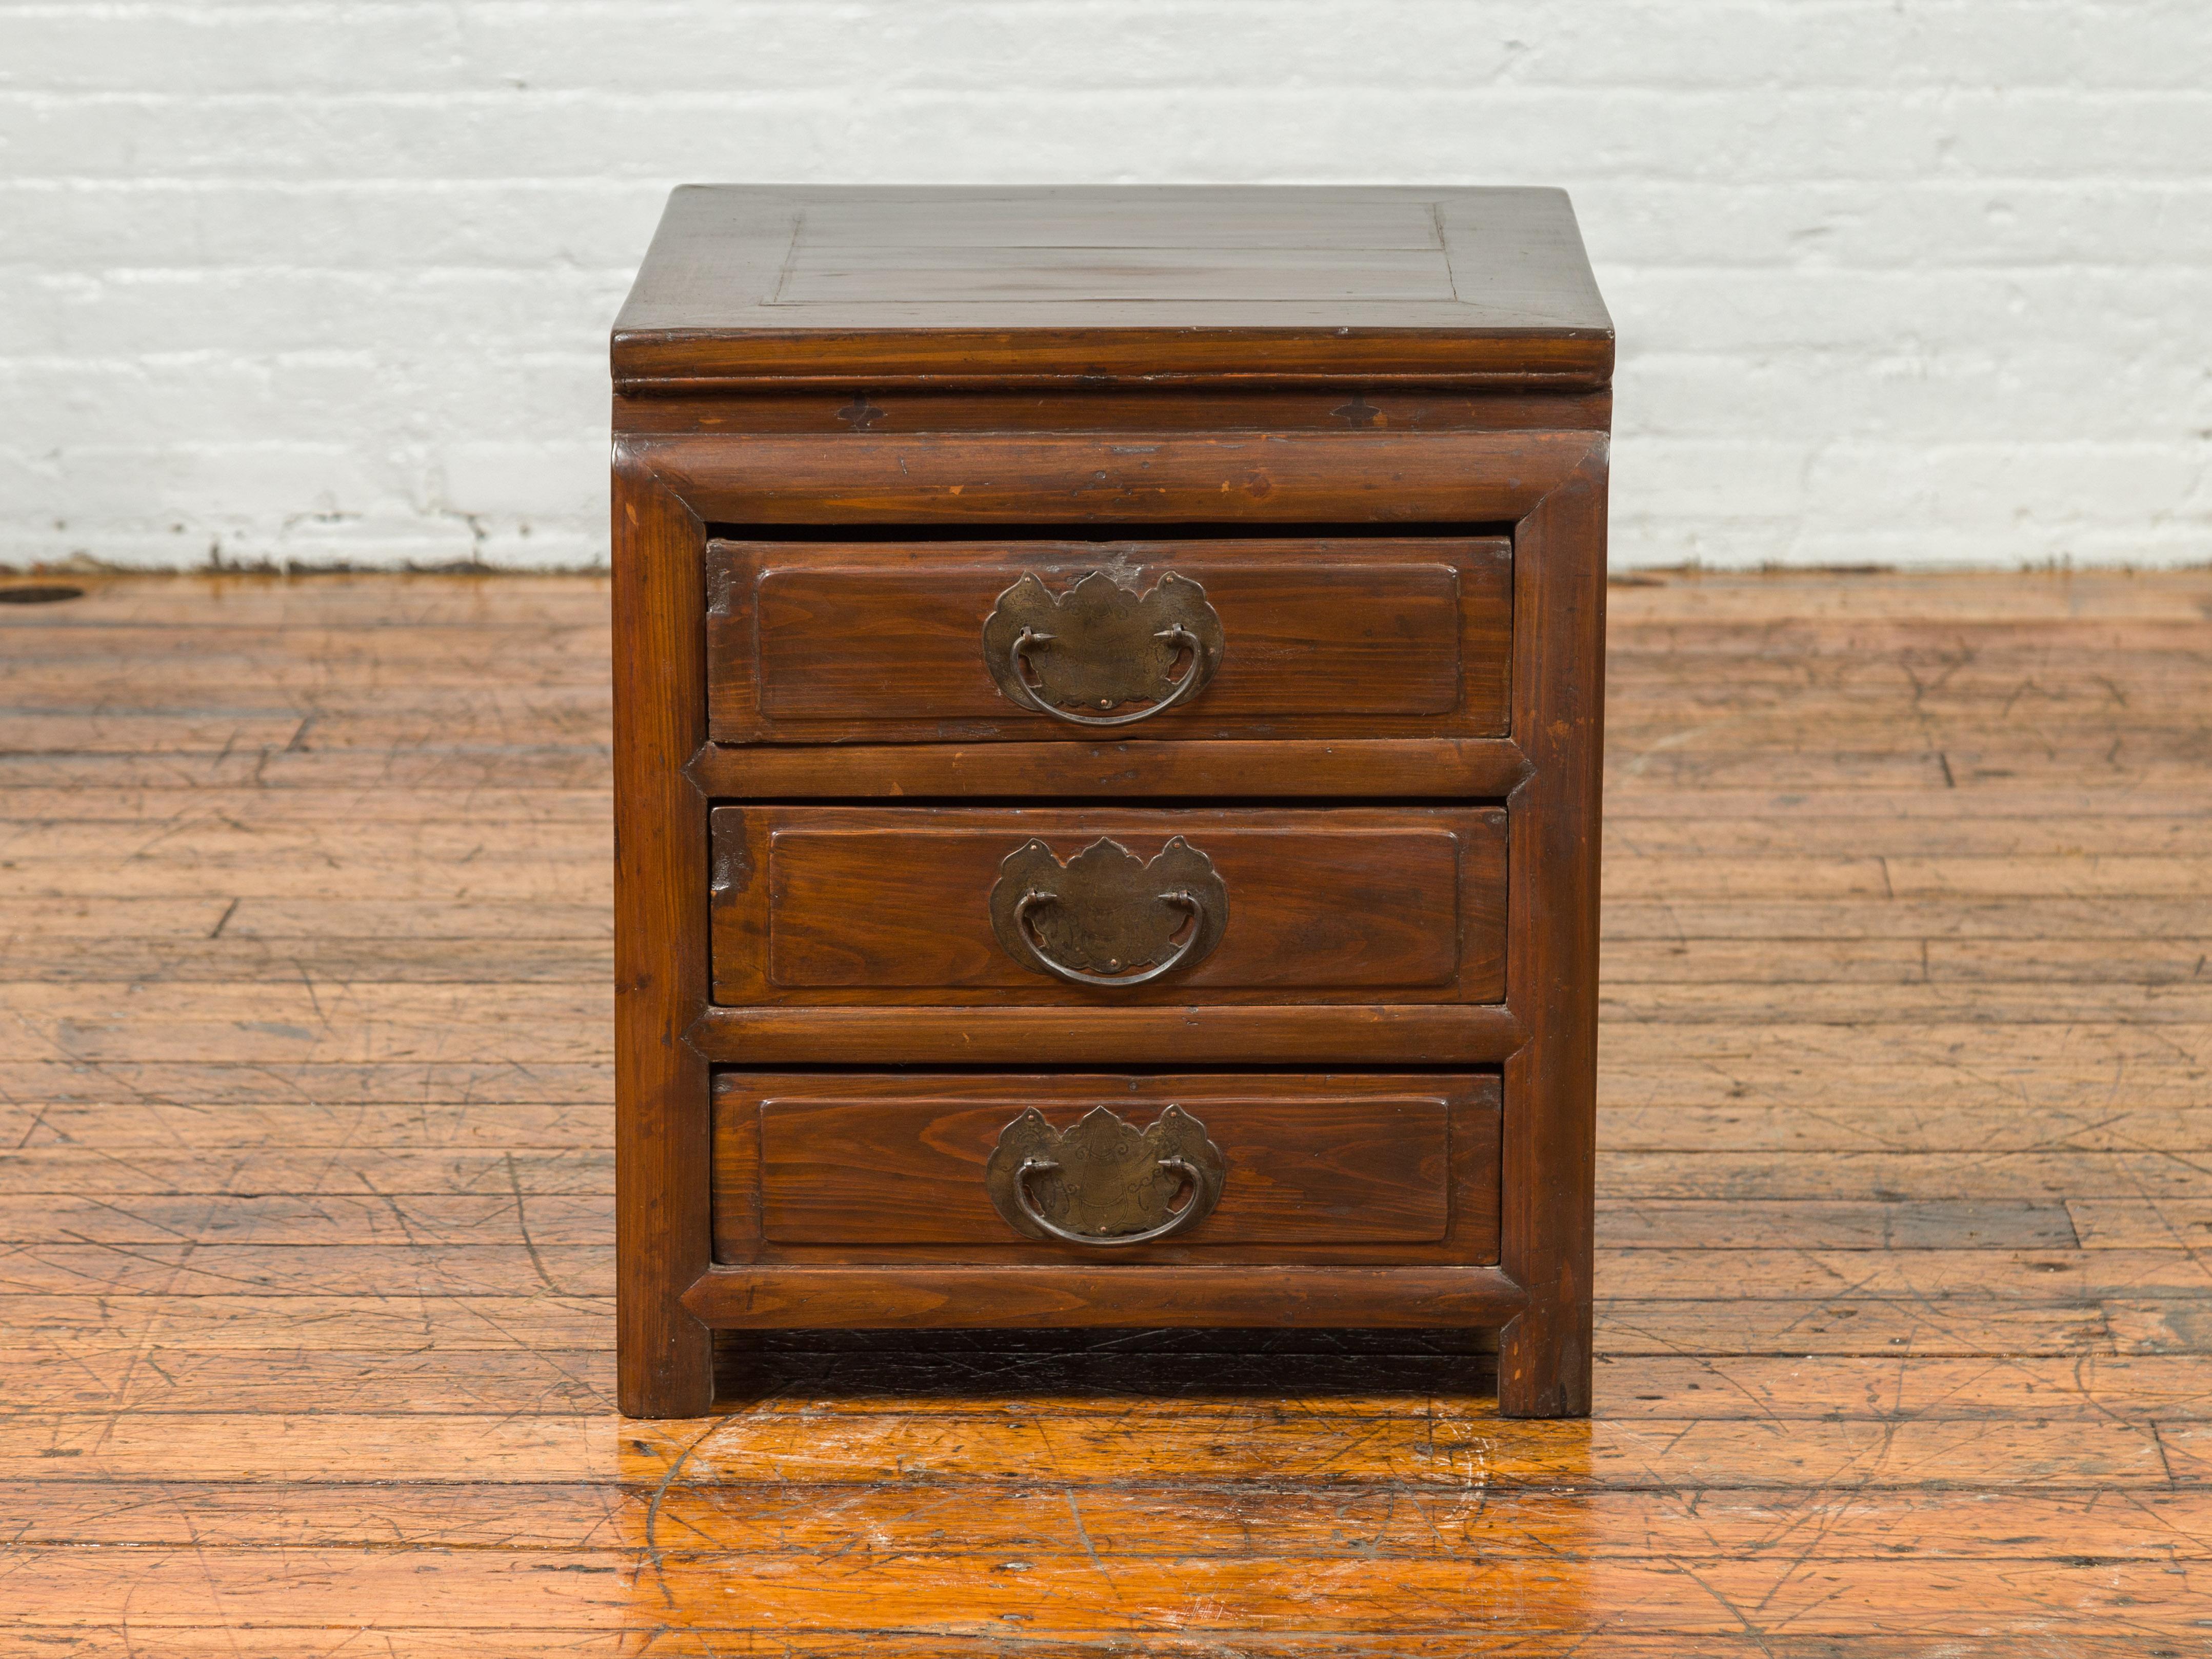 A vintage side chest from the mid-20th century, with three drawers and traditional hardware. This mid-20th century Chinese side chest merges traditional aesthetics with functional design, making it a timeless addition to any modern home. Featuring a